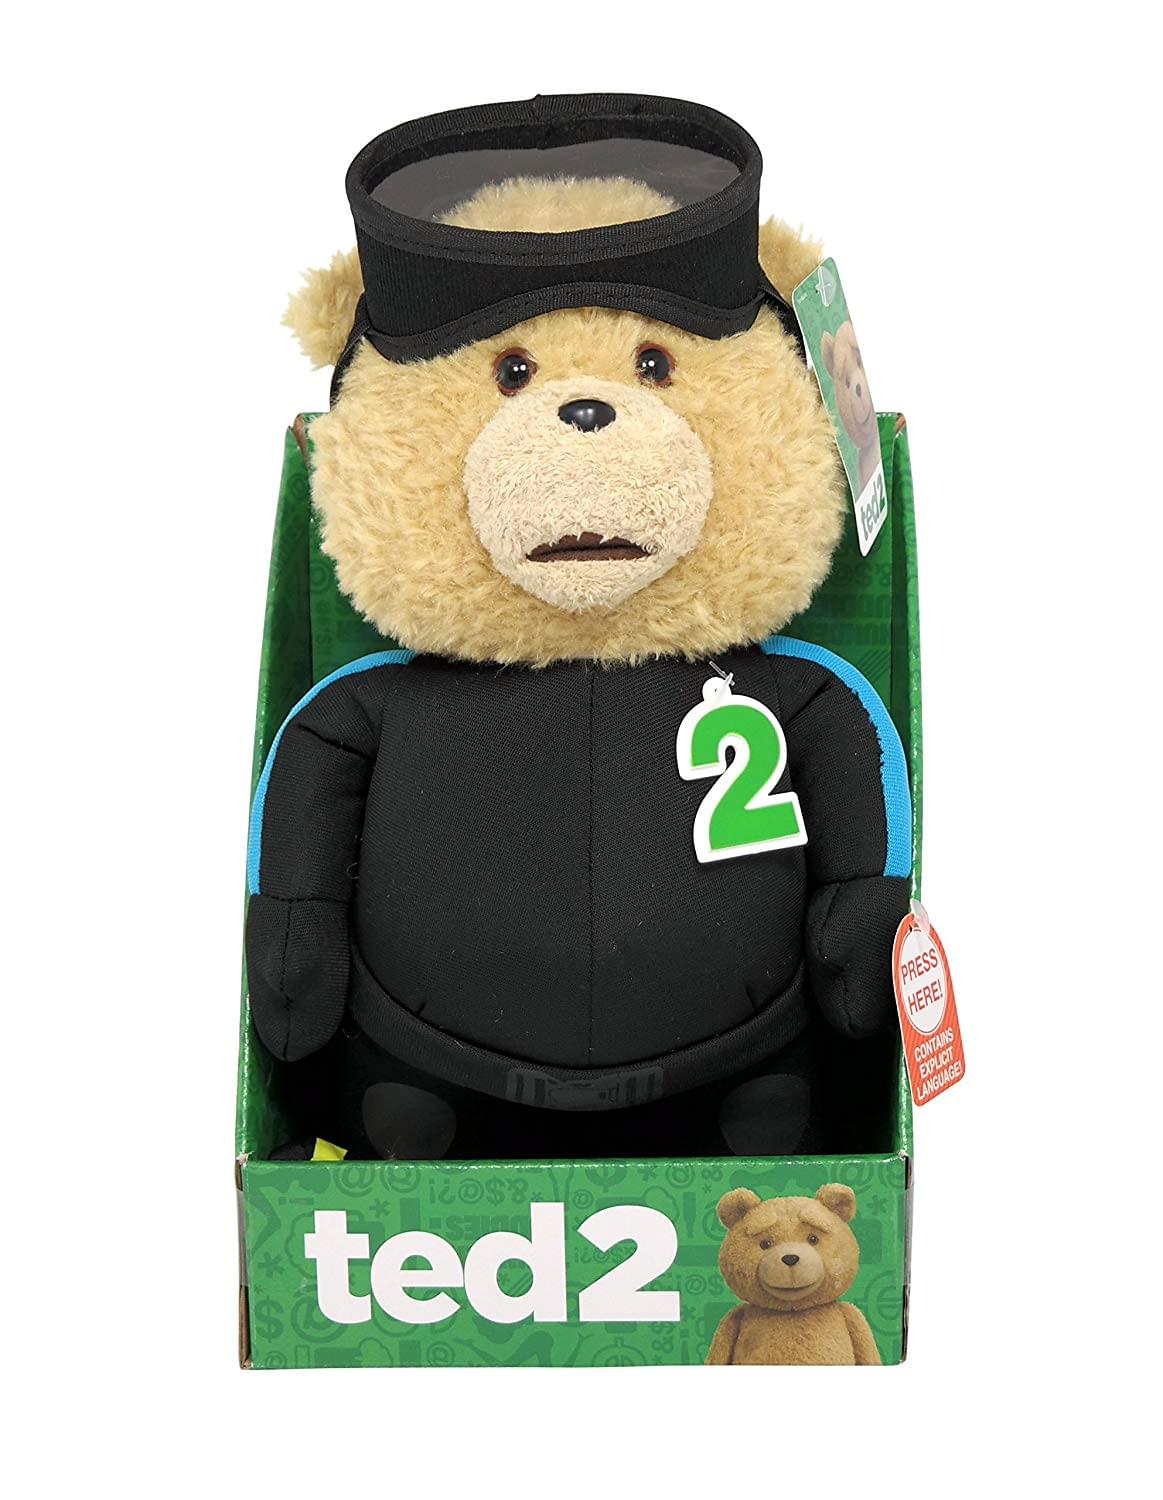 Ted 2 Talking Ted In Scuba Outfit 16 Inch Plush Teddy Bear - Explicit